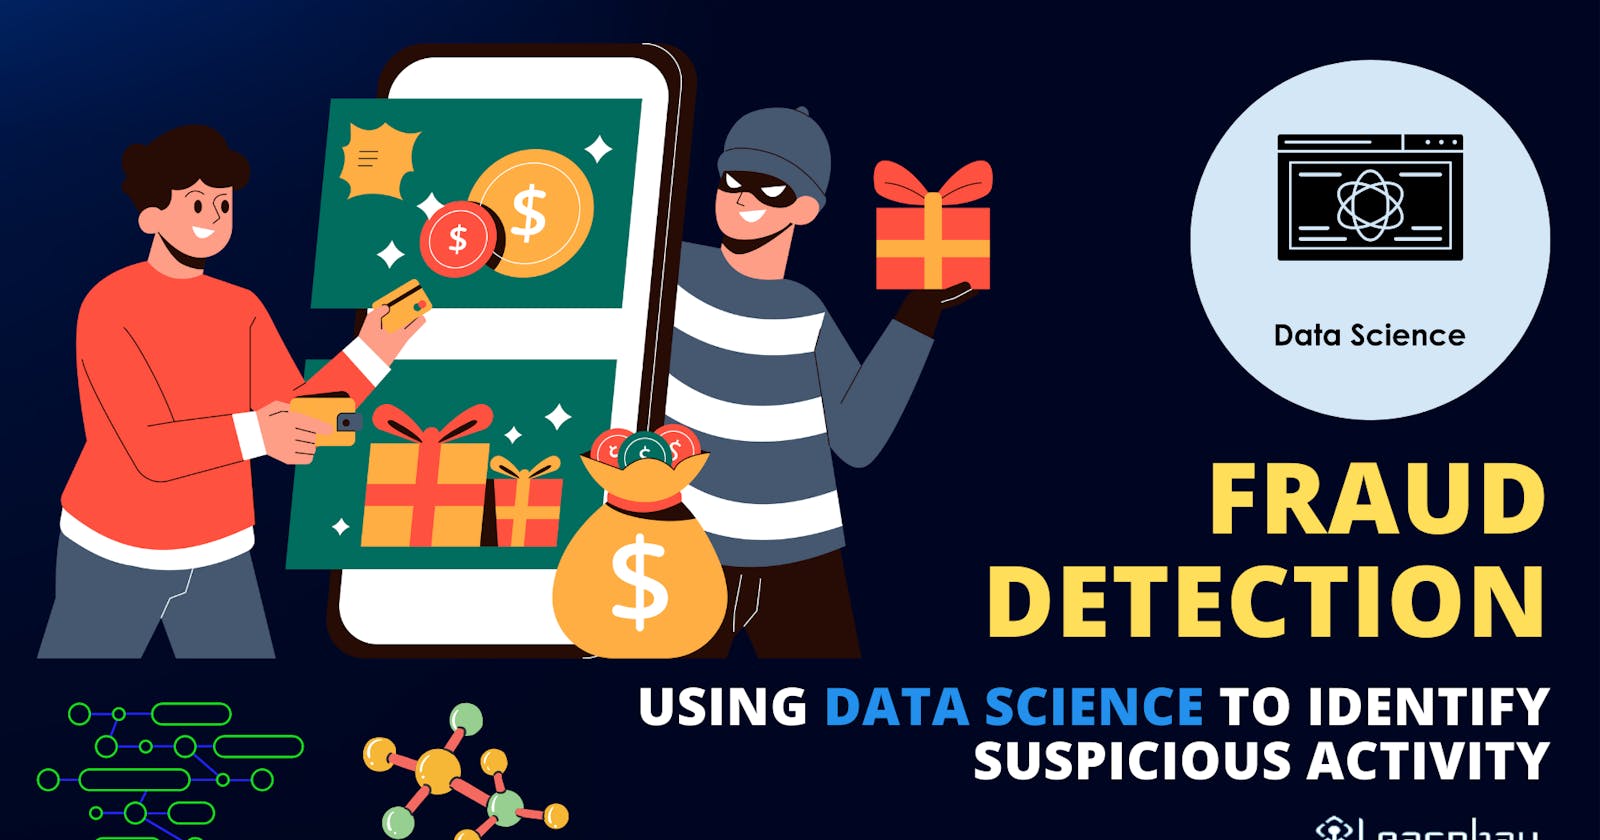 Fraud Detection: Using Data Science to Identify Suspicious Activity